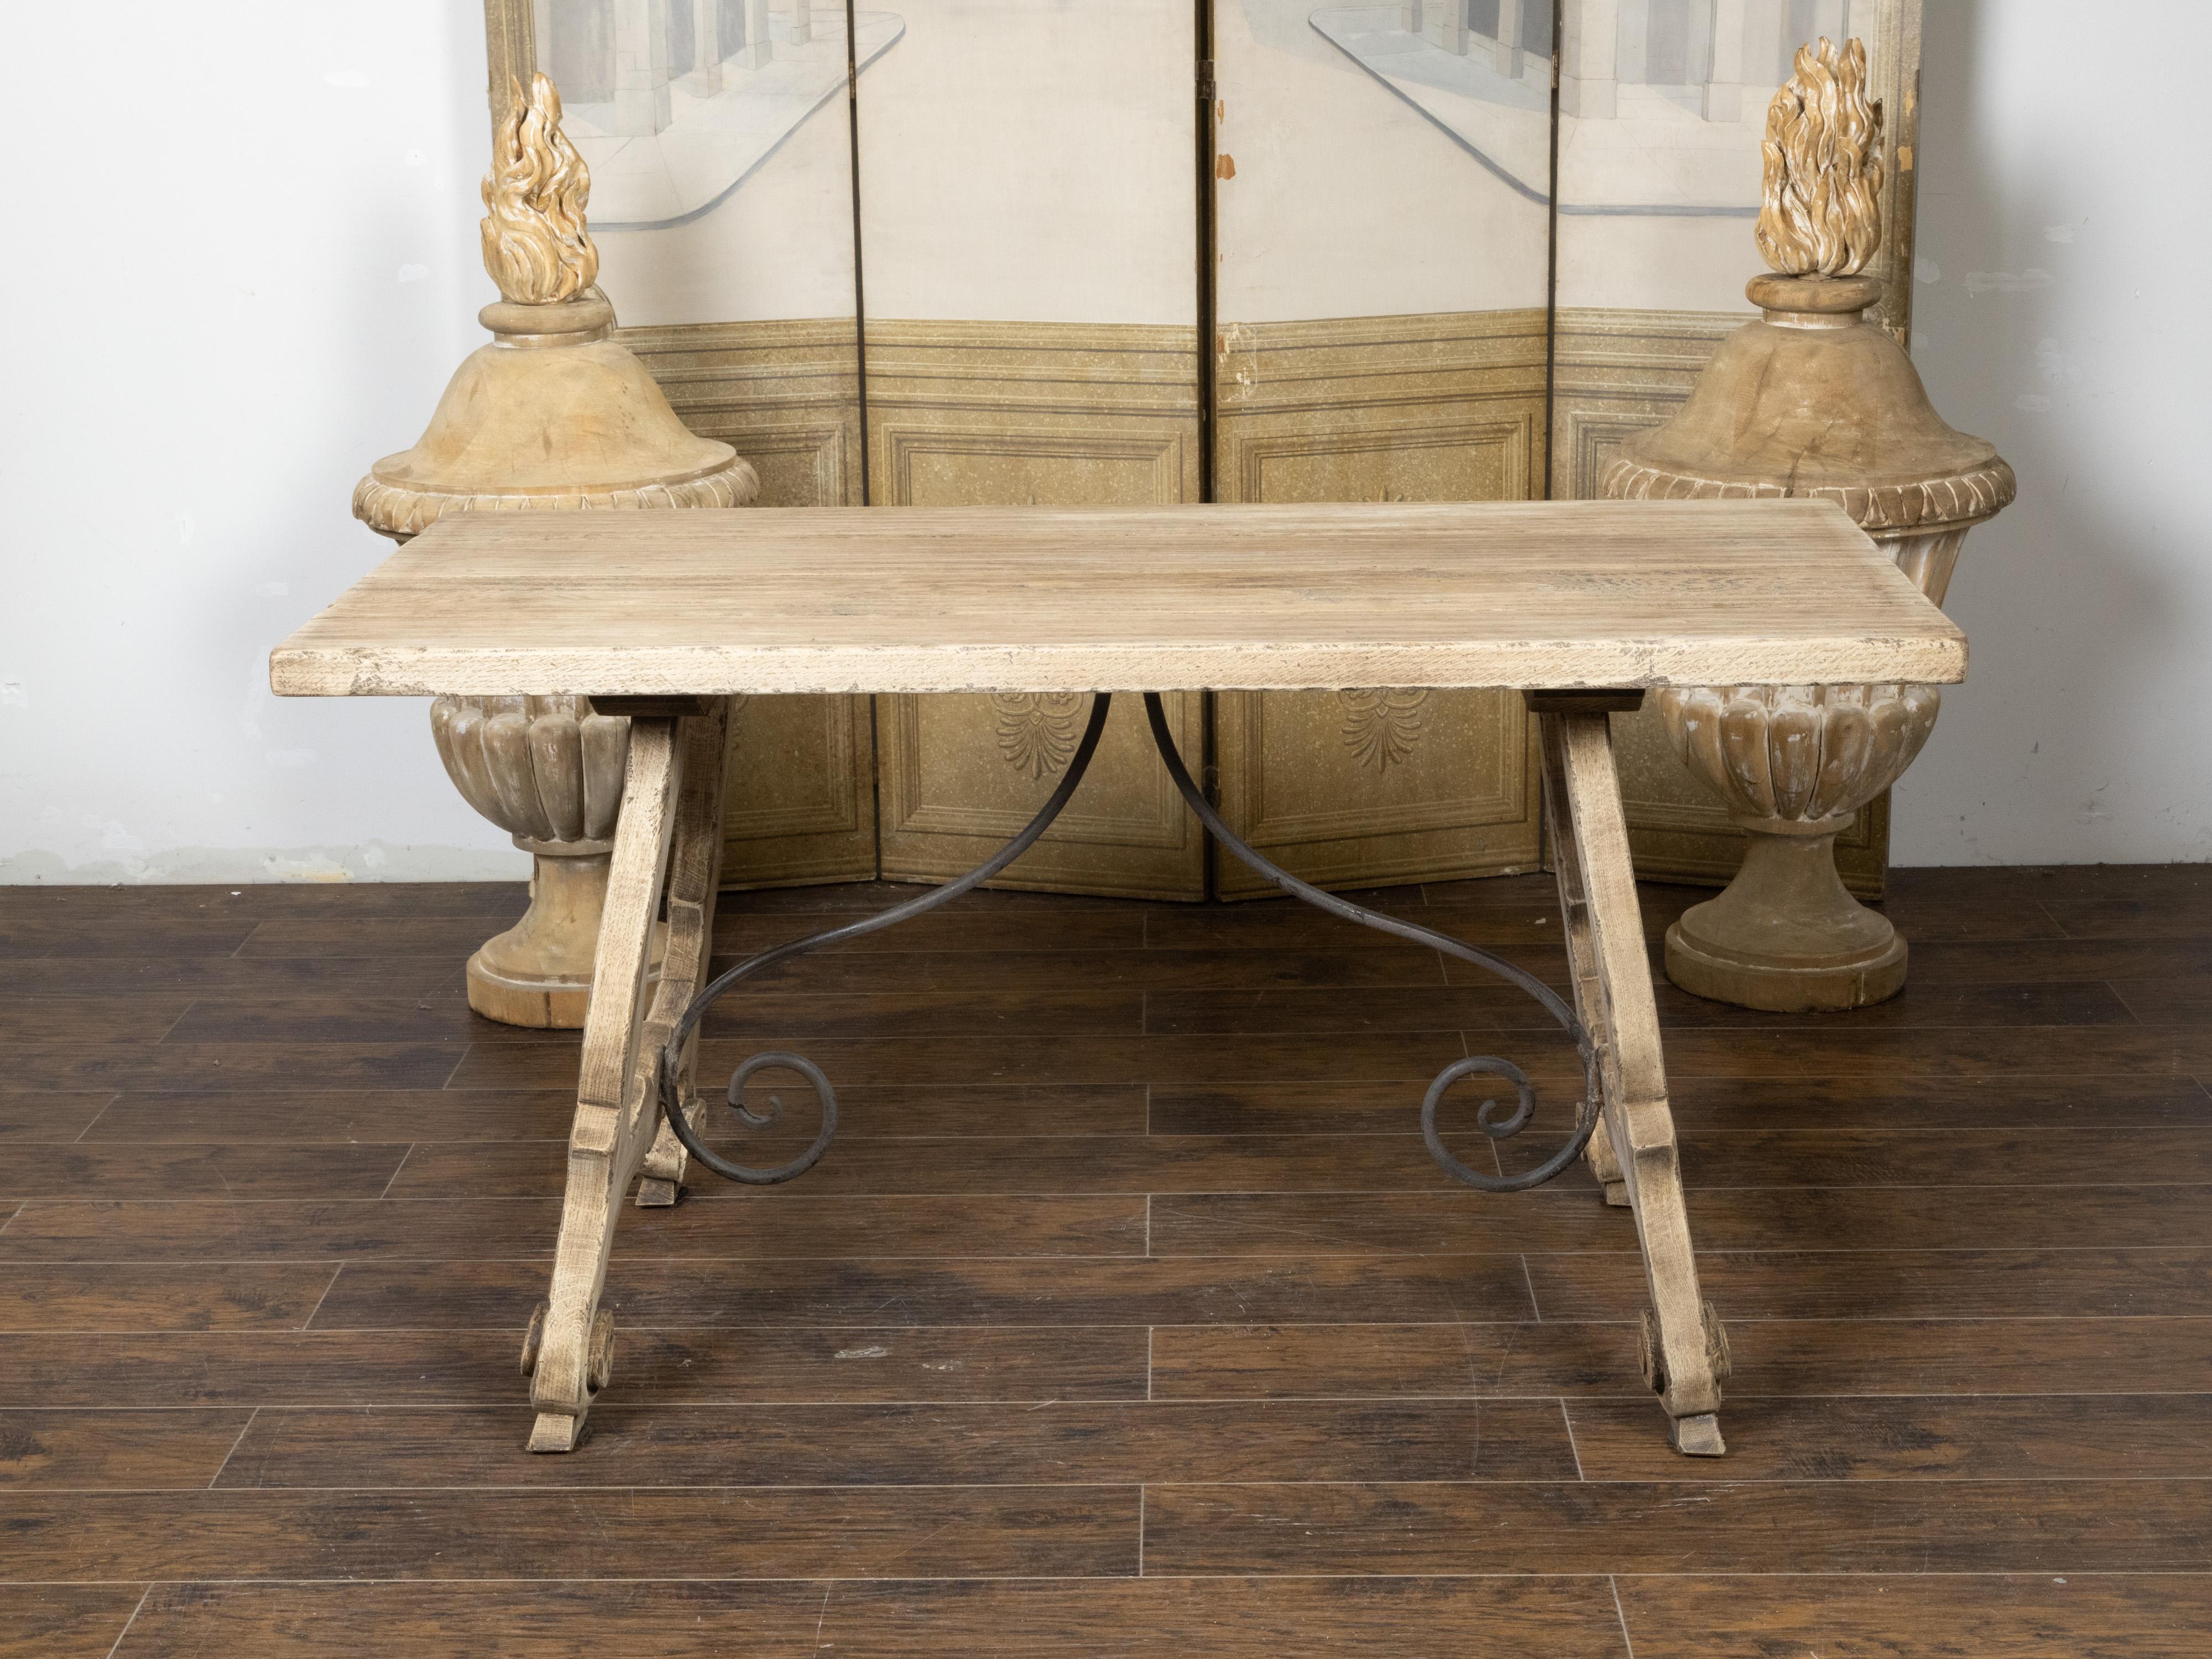 A Spanish bleached oak Fratino table from the 19th century, with Baroque style lyre shaped base, scrolling feet, iron stretchers and weathered appearance. Created in Spain during the 19th century, this Fratino table features a bleached oak finish